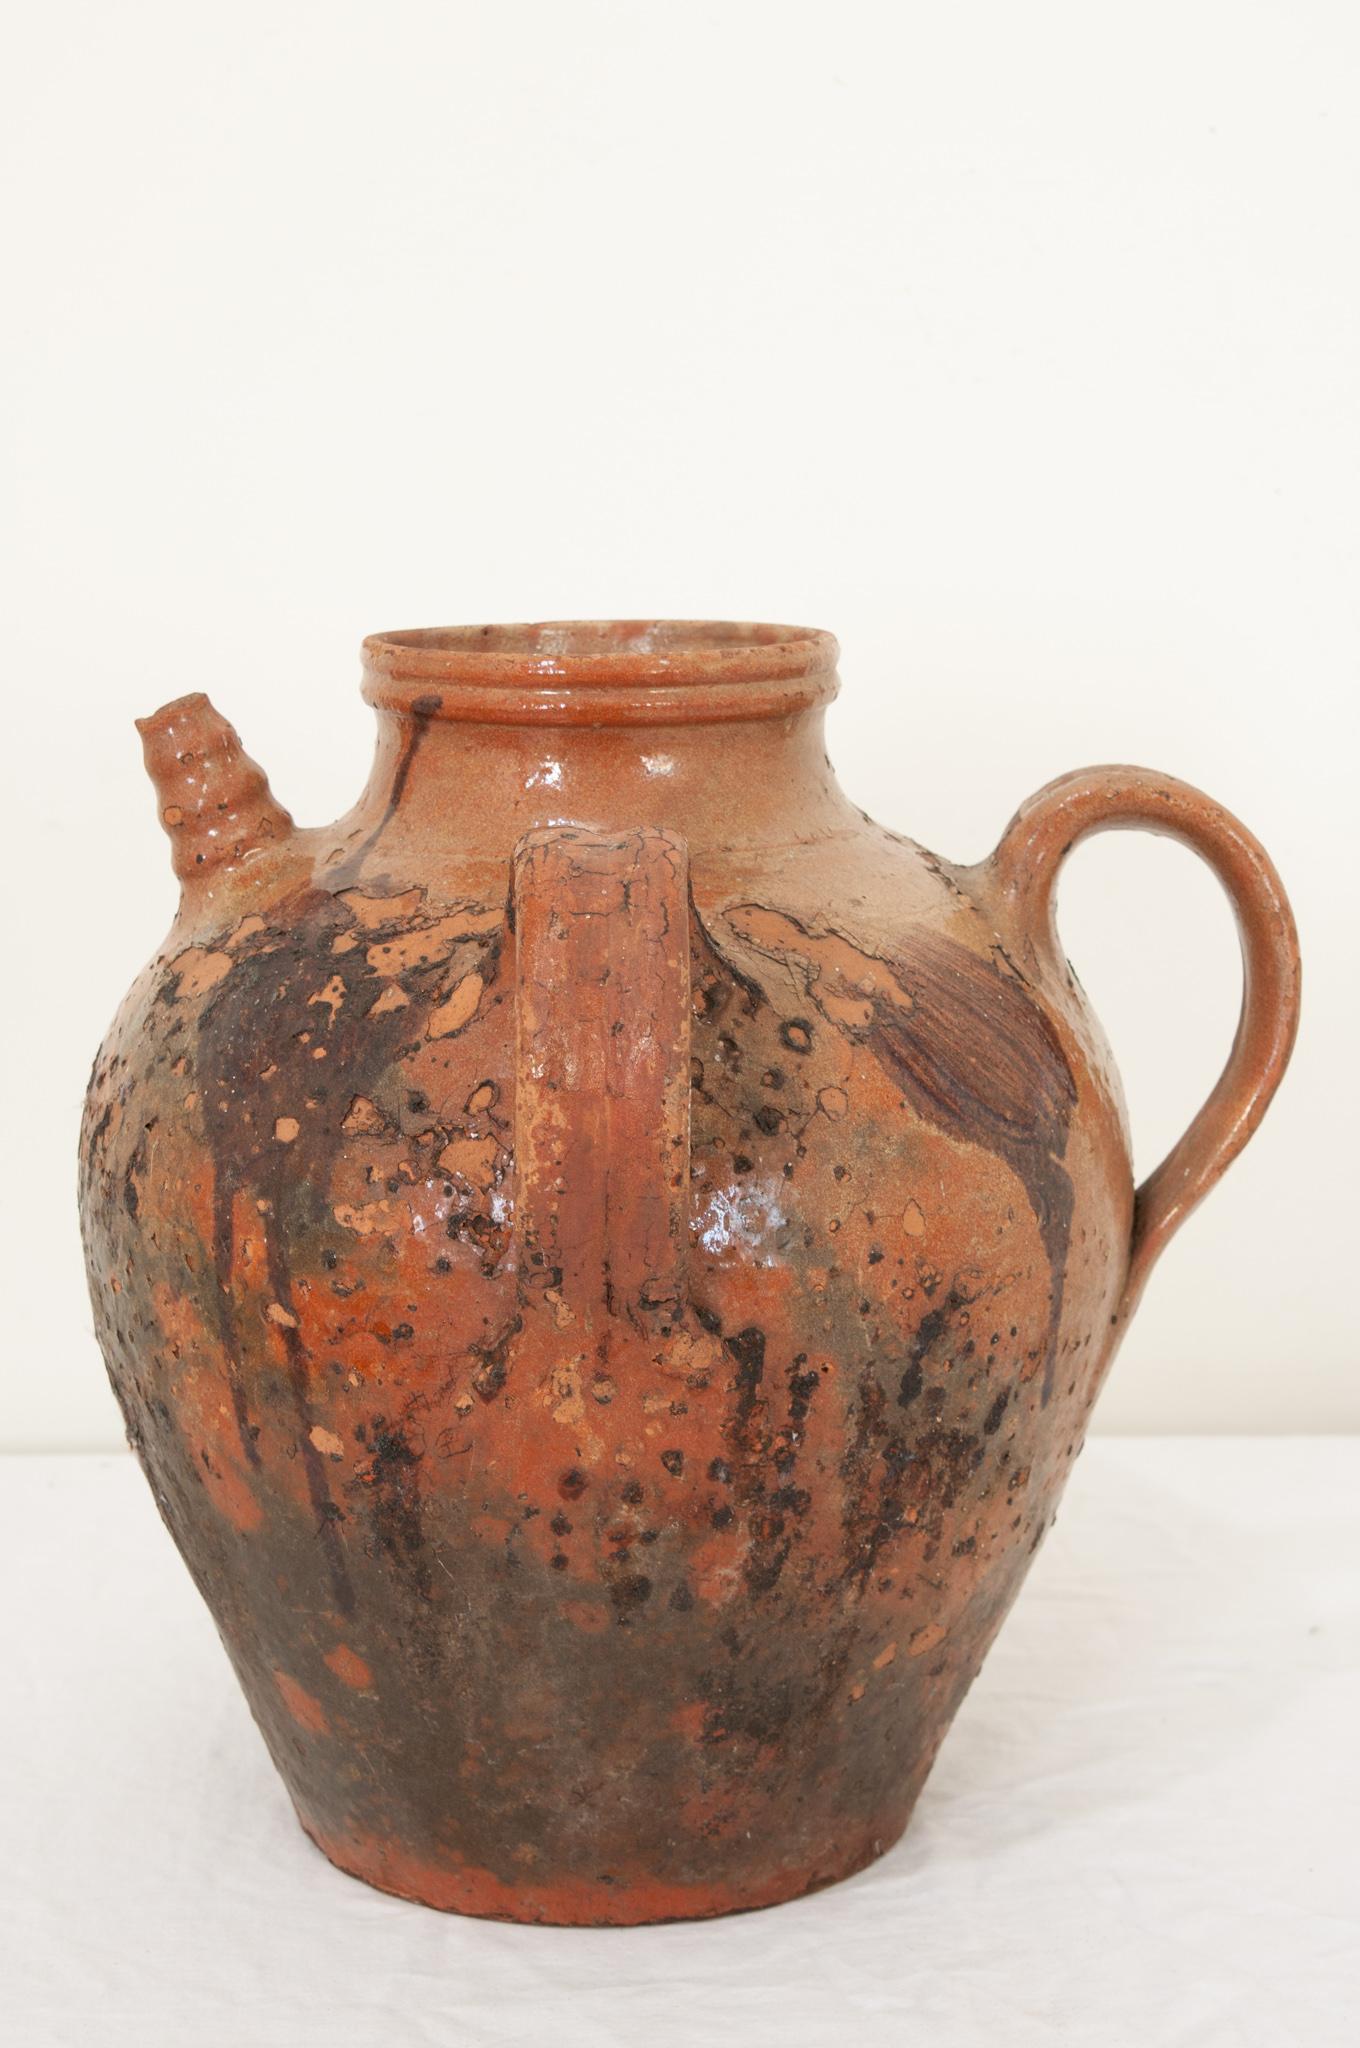 A French terracotta olive oil jar from the early 19th century, with wonderful glazes of vibrant orange and energetic black splashes that surround the entire piece. Hand-crafted in France circa 1800 this terracotta oil jar has a top circular opening